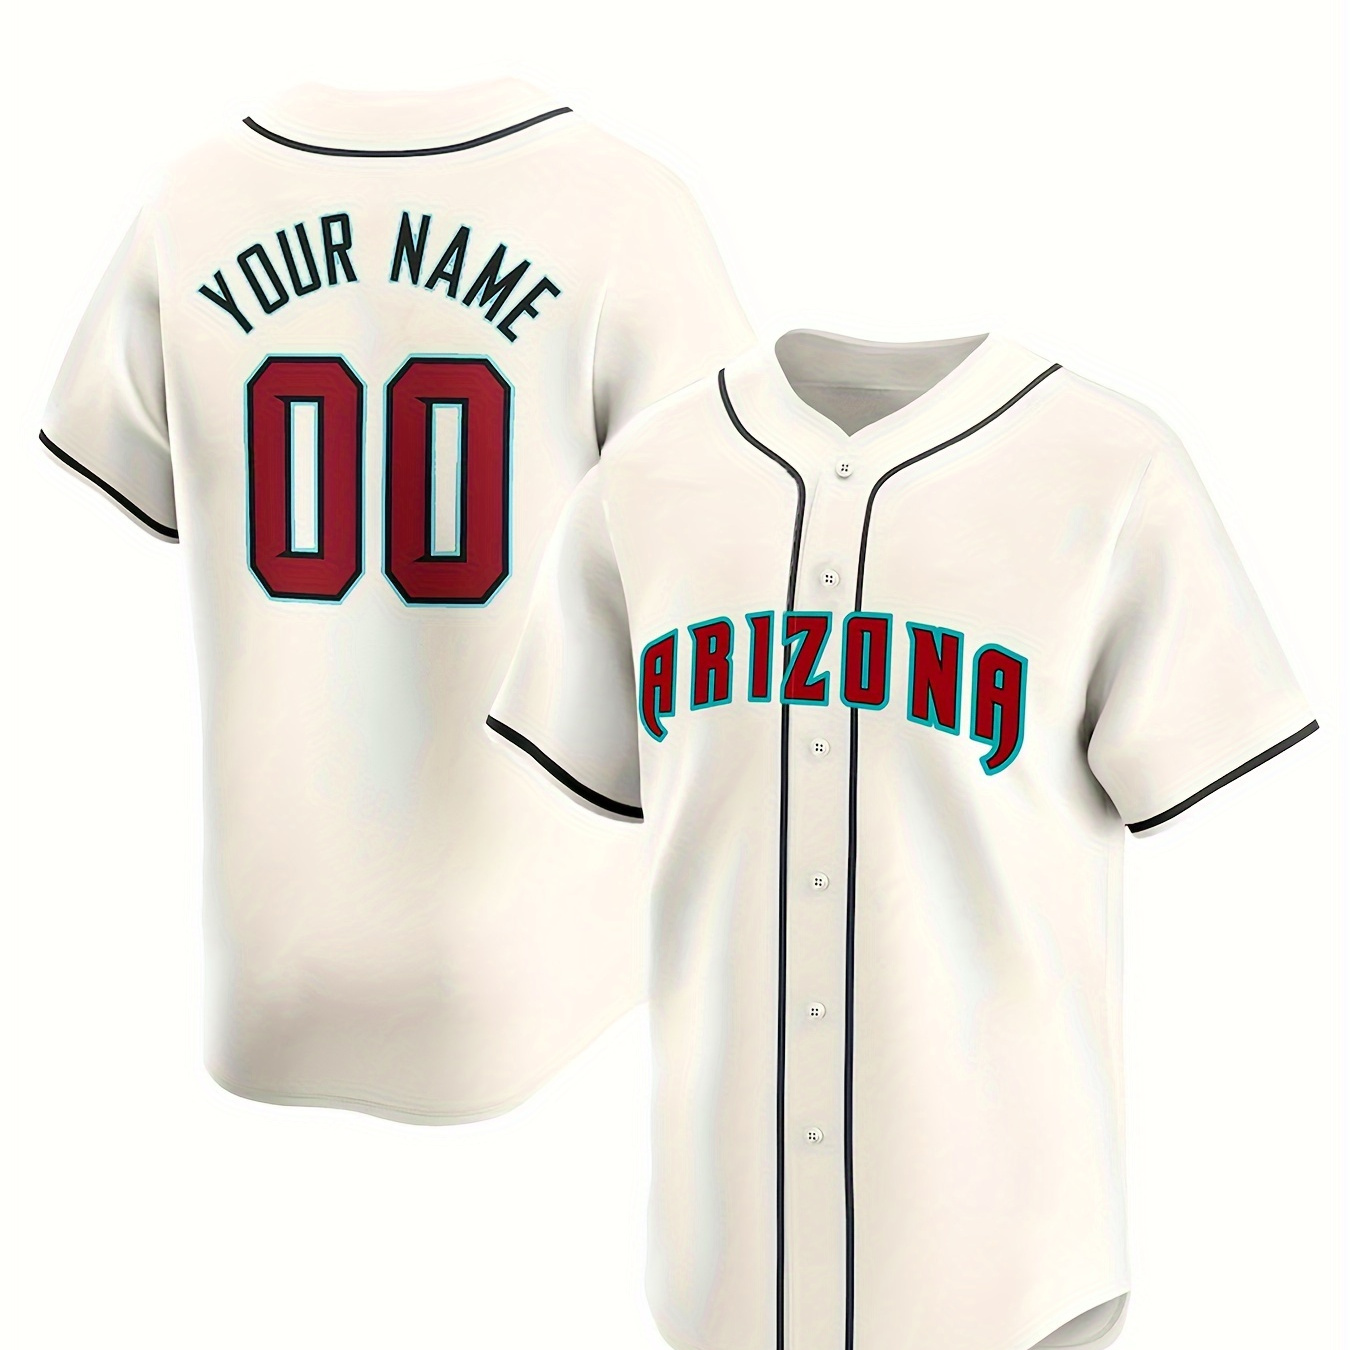 

Customized Name And Number Design, Men's Arizona Embroidery Design Short Sleeve Loose Breathable V-neck Baseball Jersey, Sports Shirt For Team Training